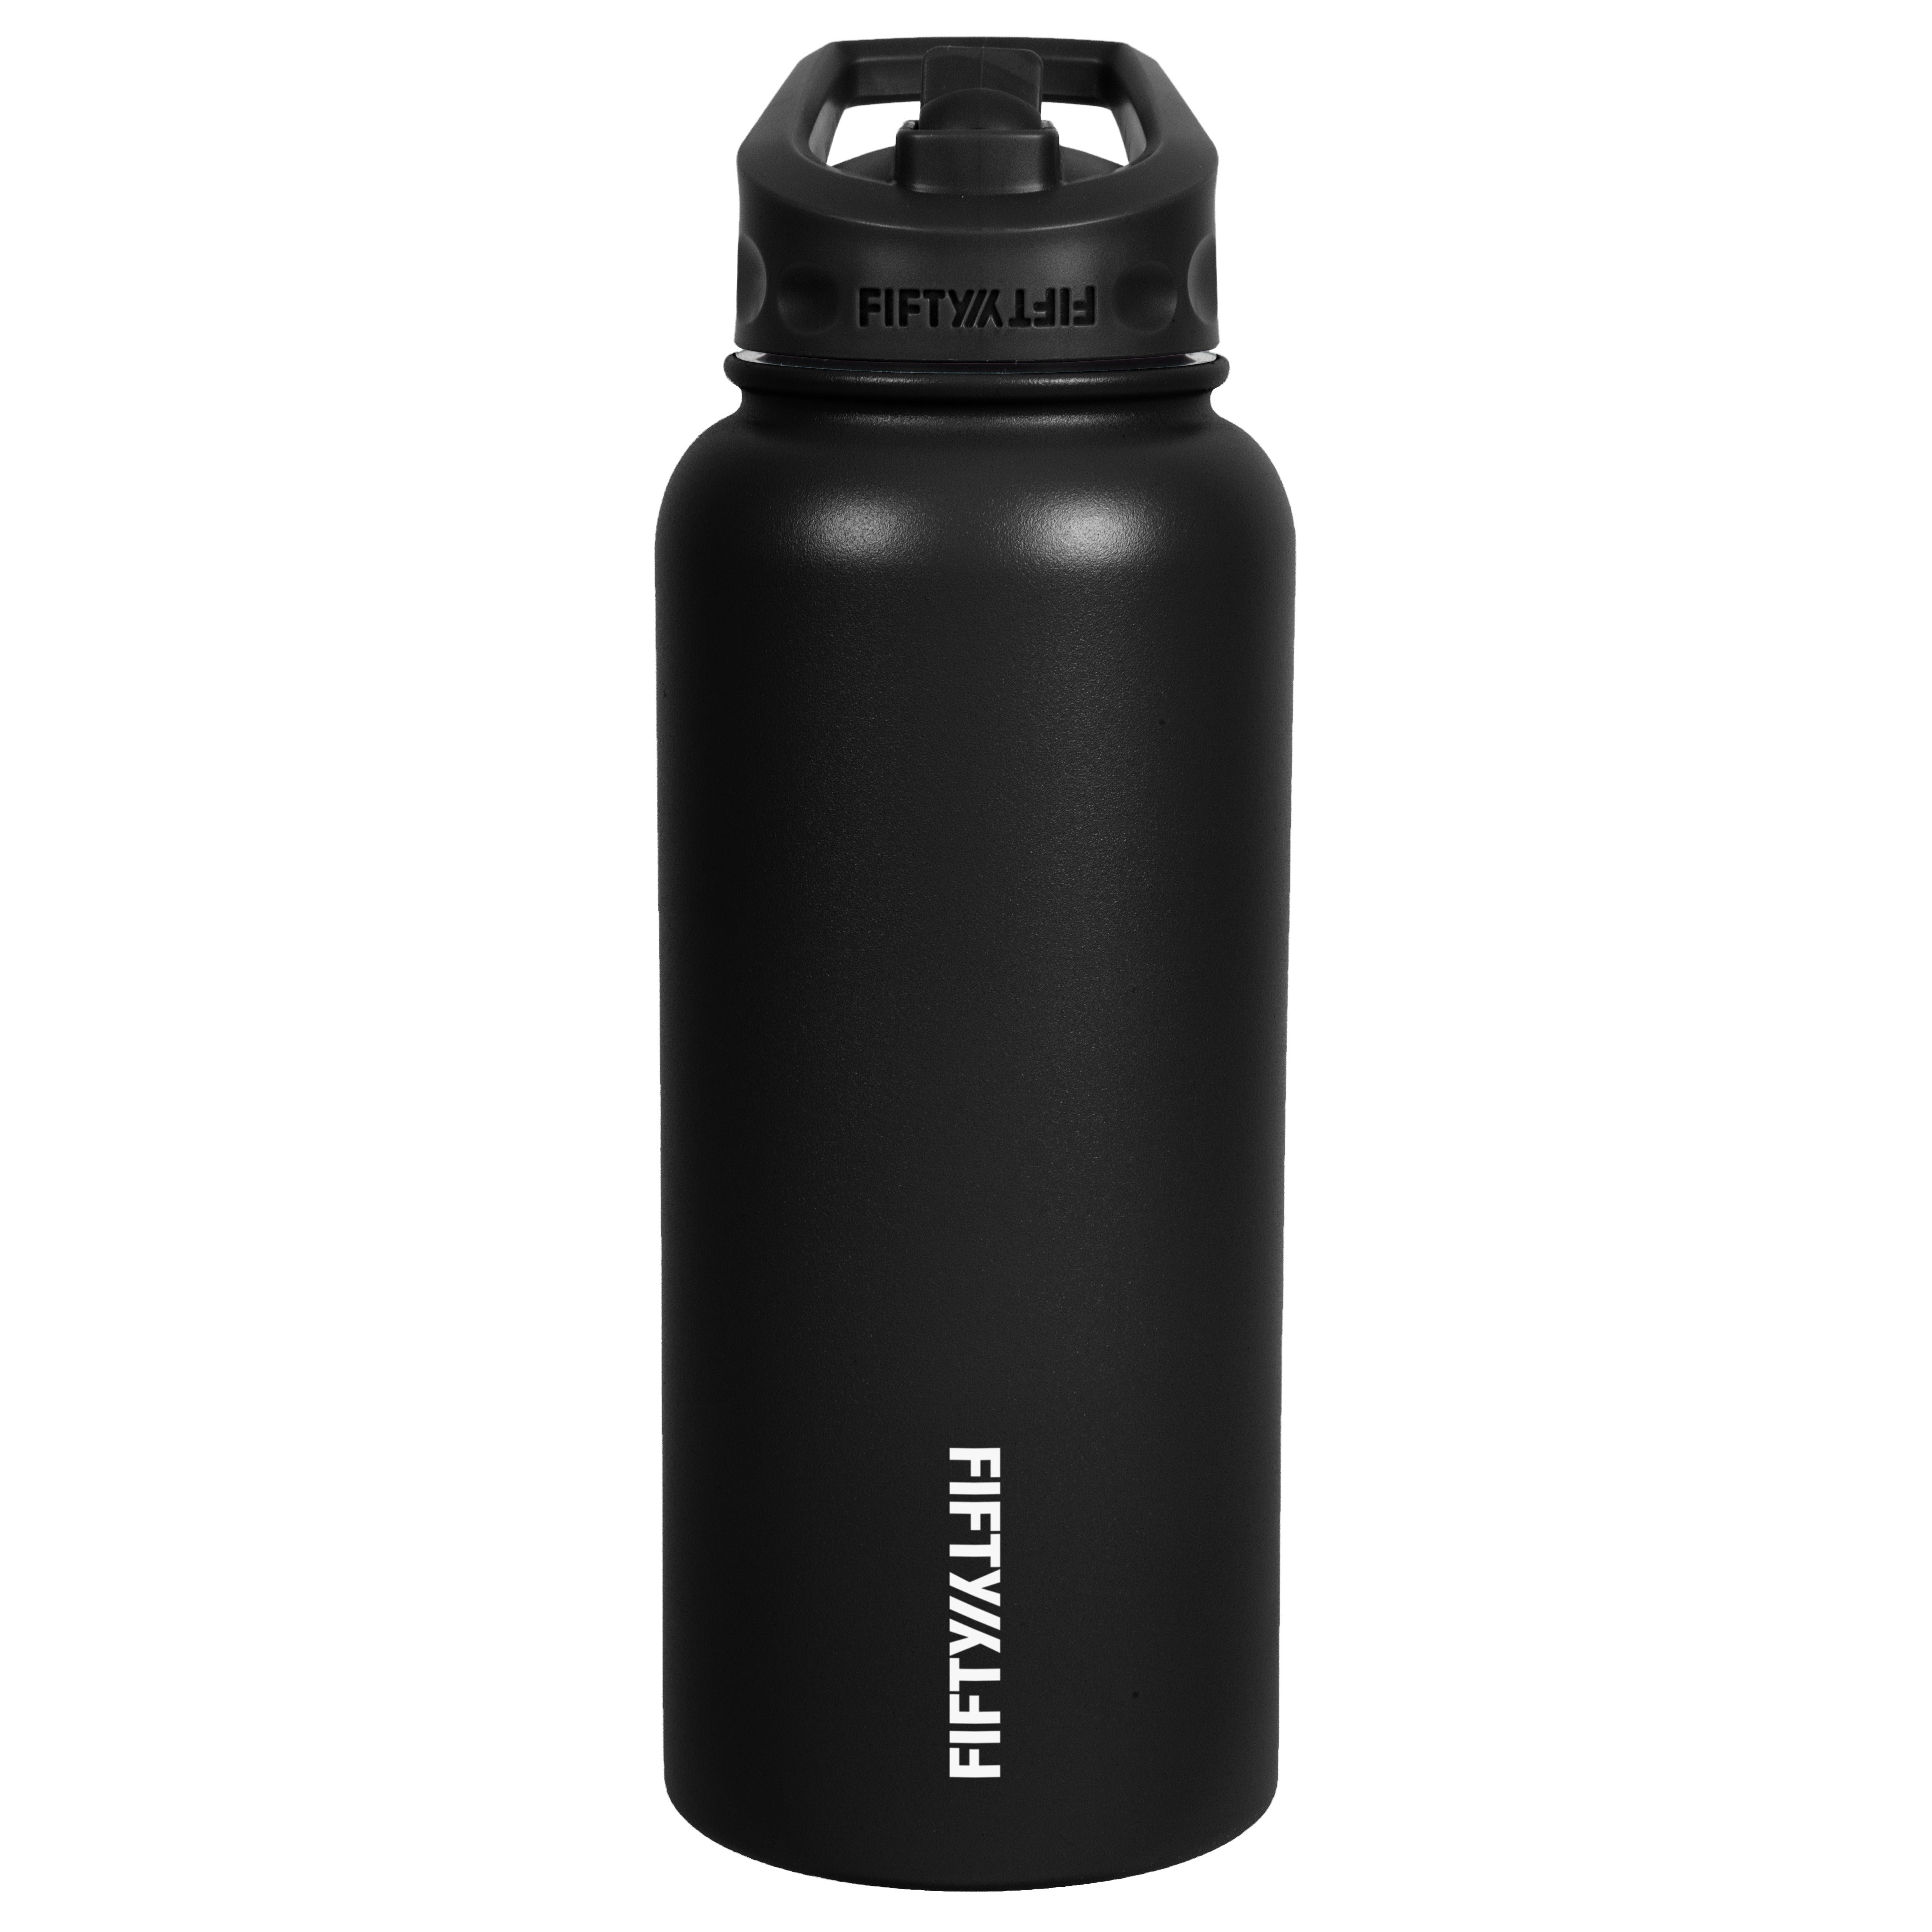 Cannon Sports Squeeze Water Bottle with Straw Lid, 34 oz, Black, Pack of 2